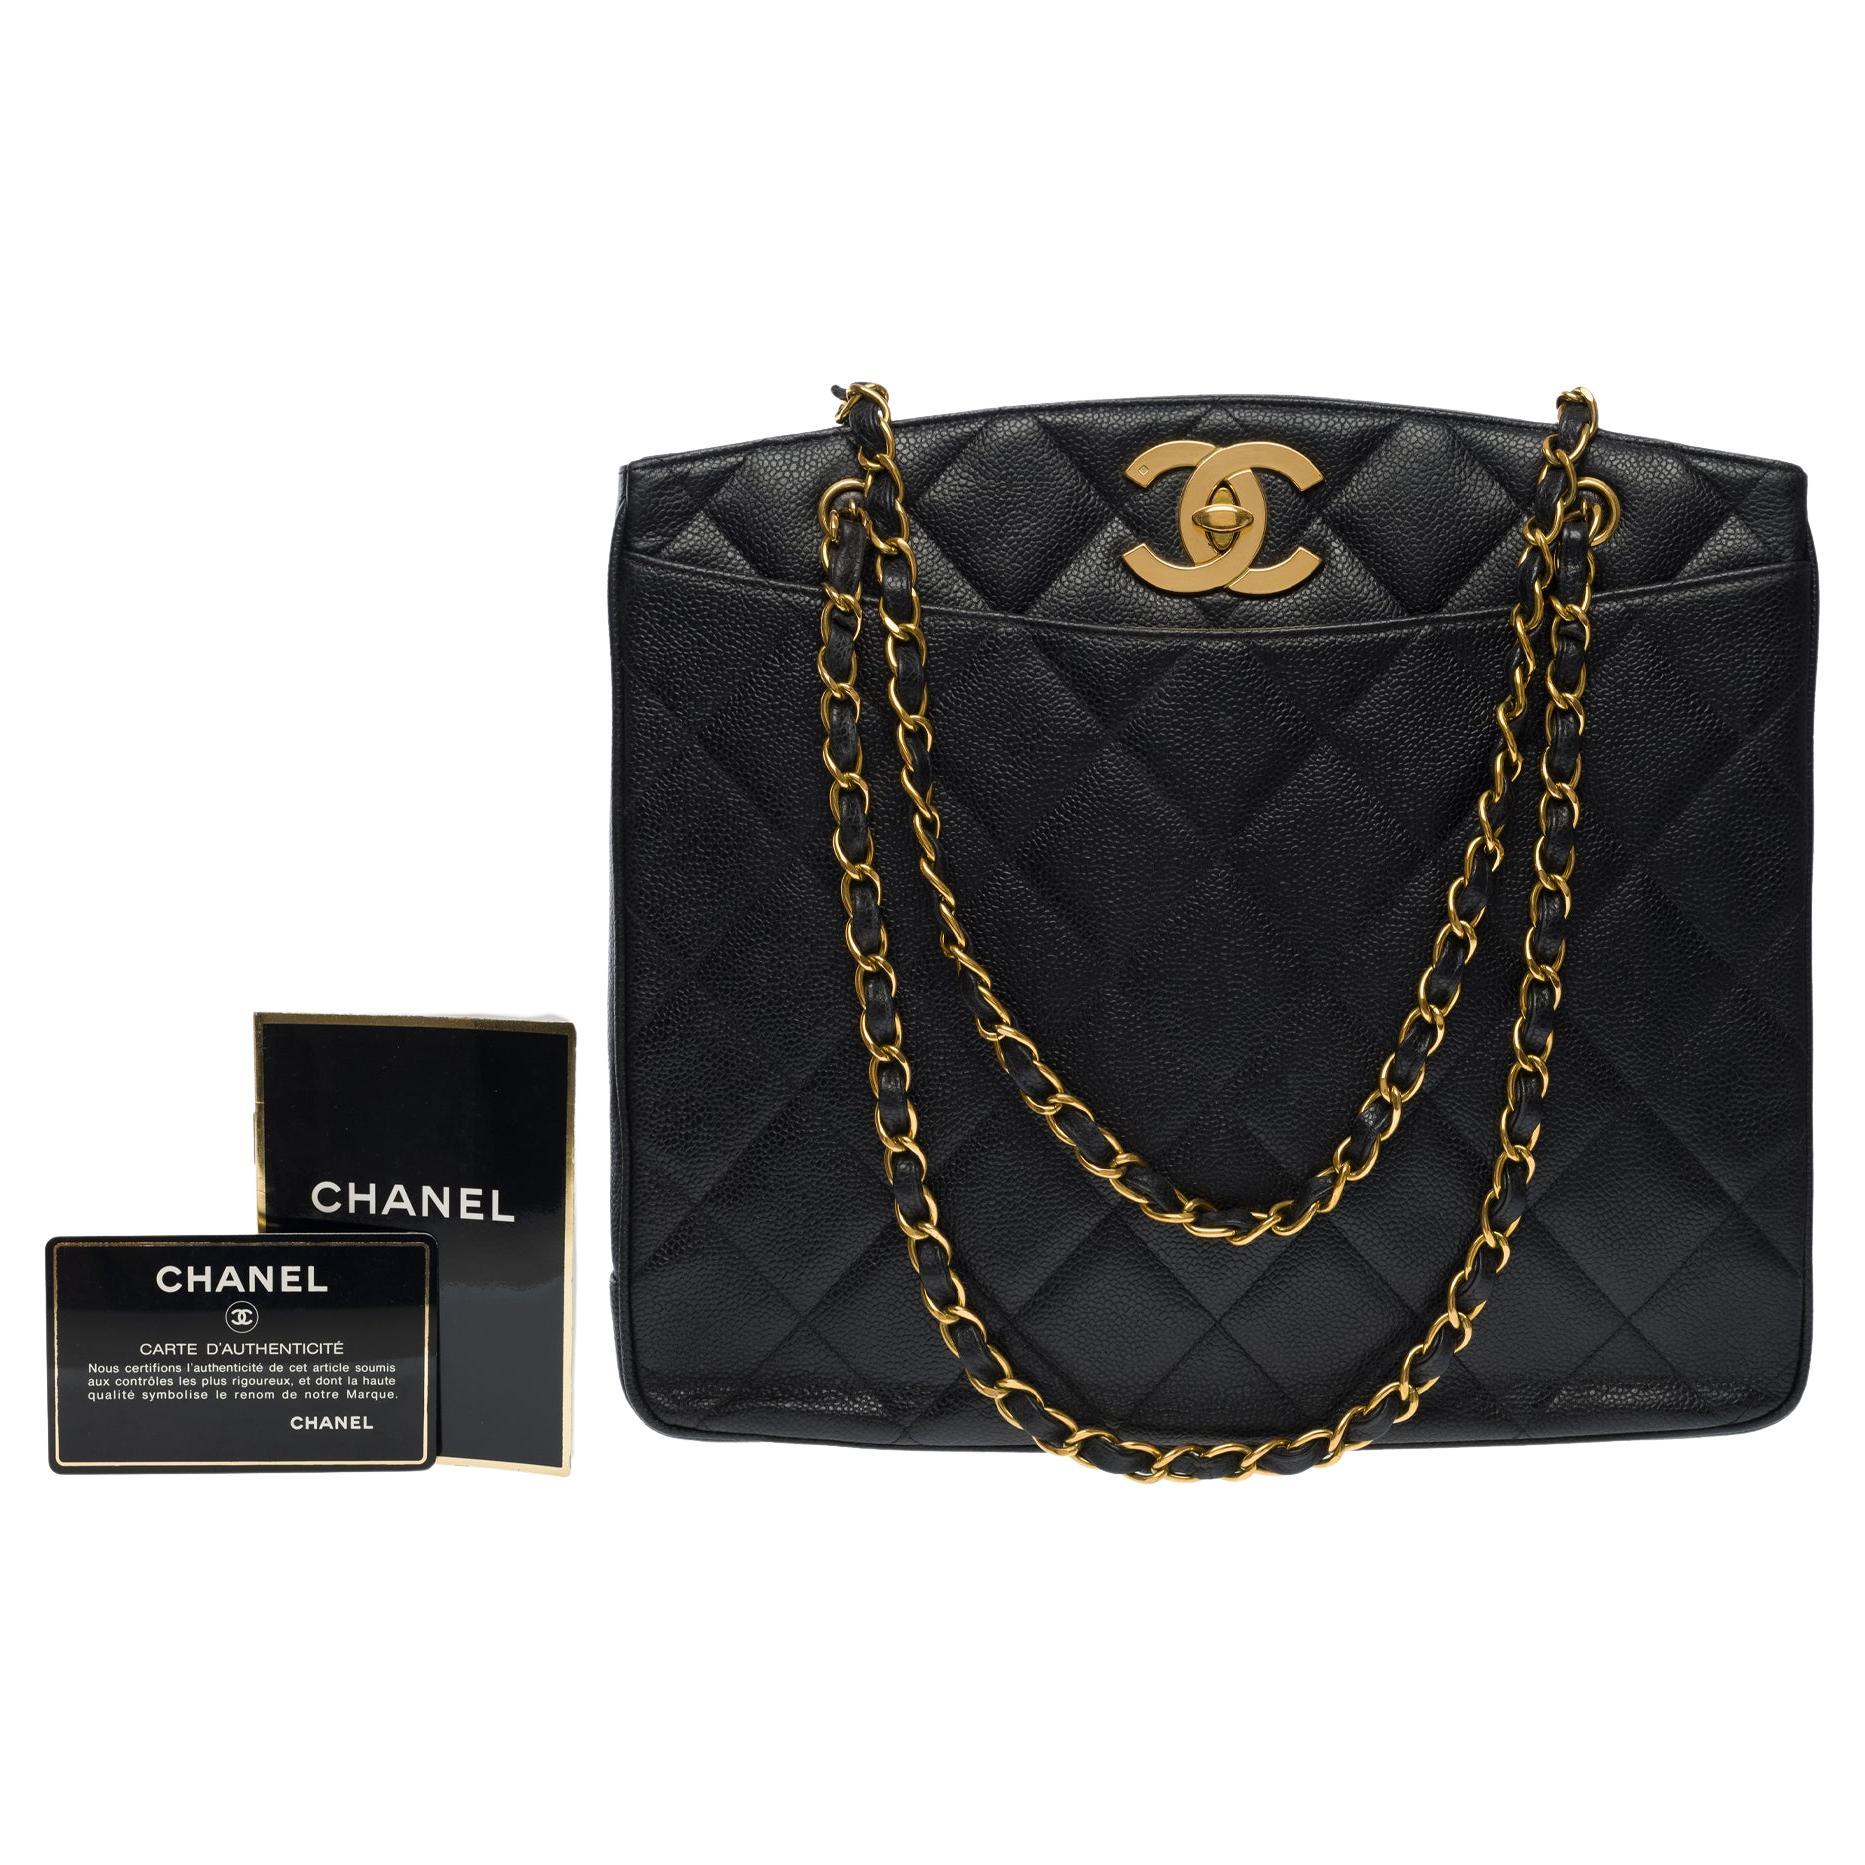 Amazing Chanel Shopping Tote bag in black Caviar quilted leather